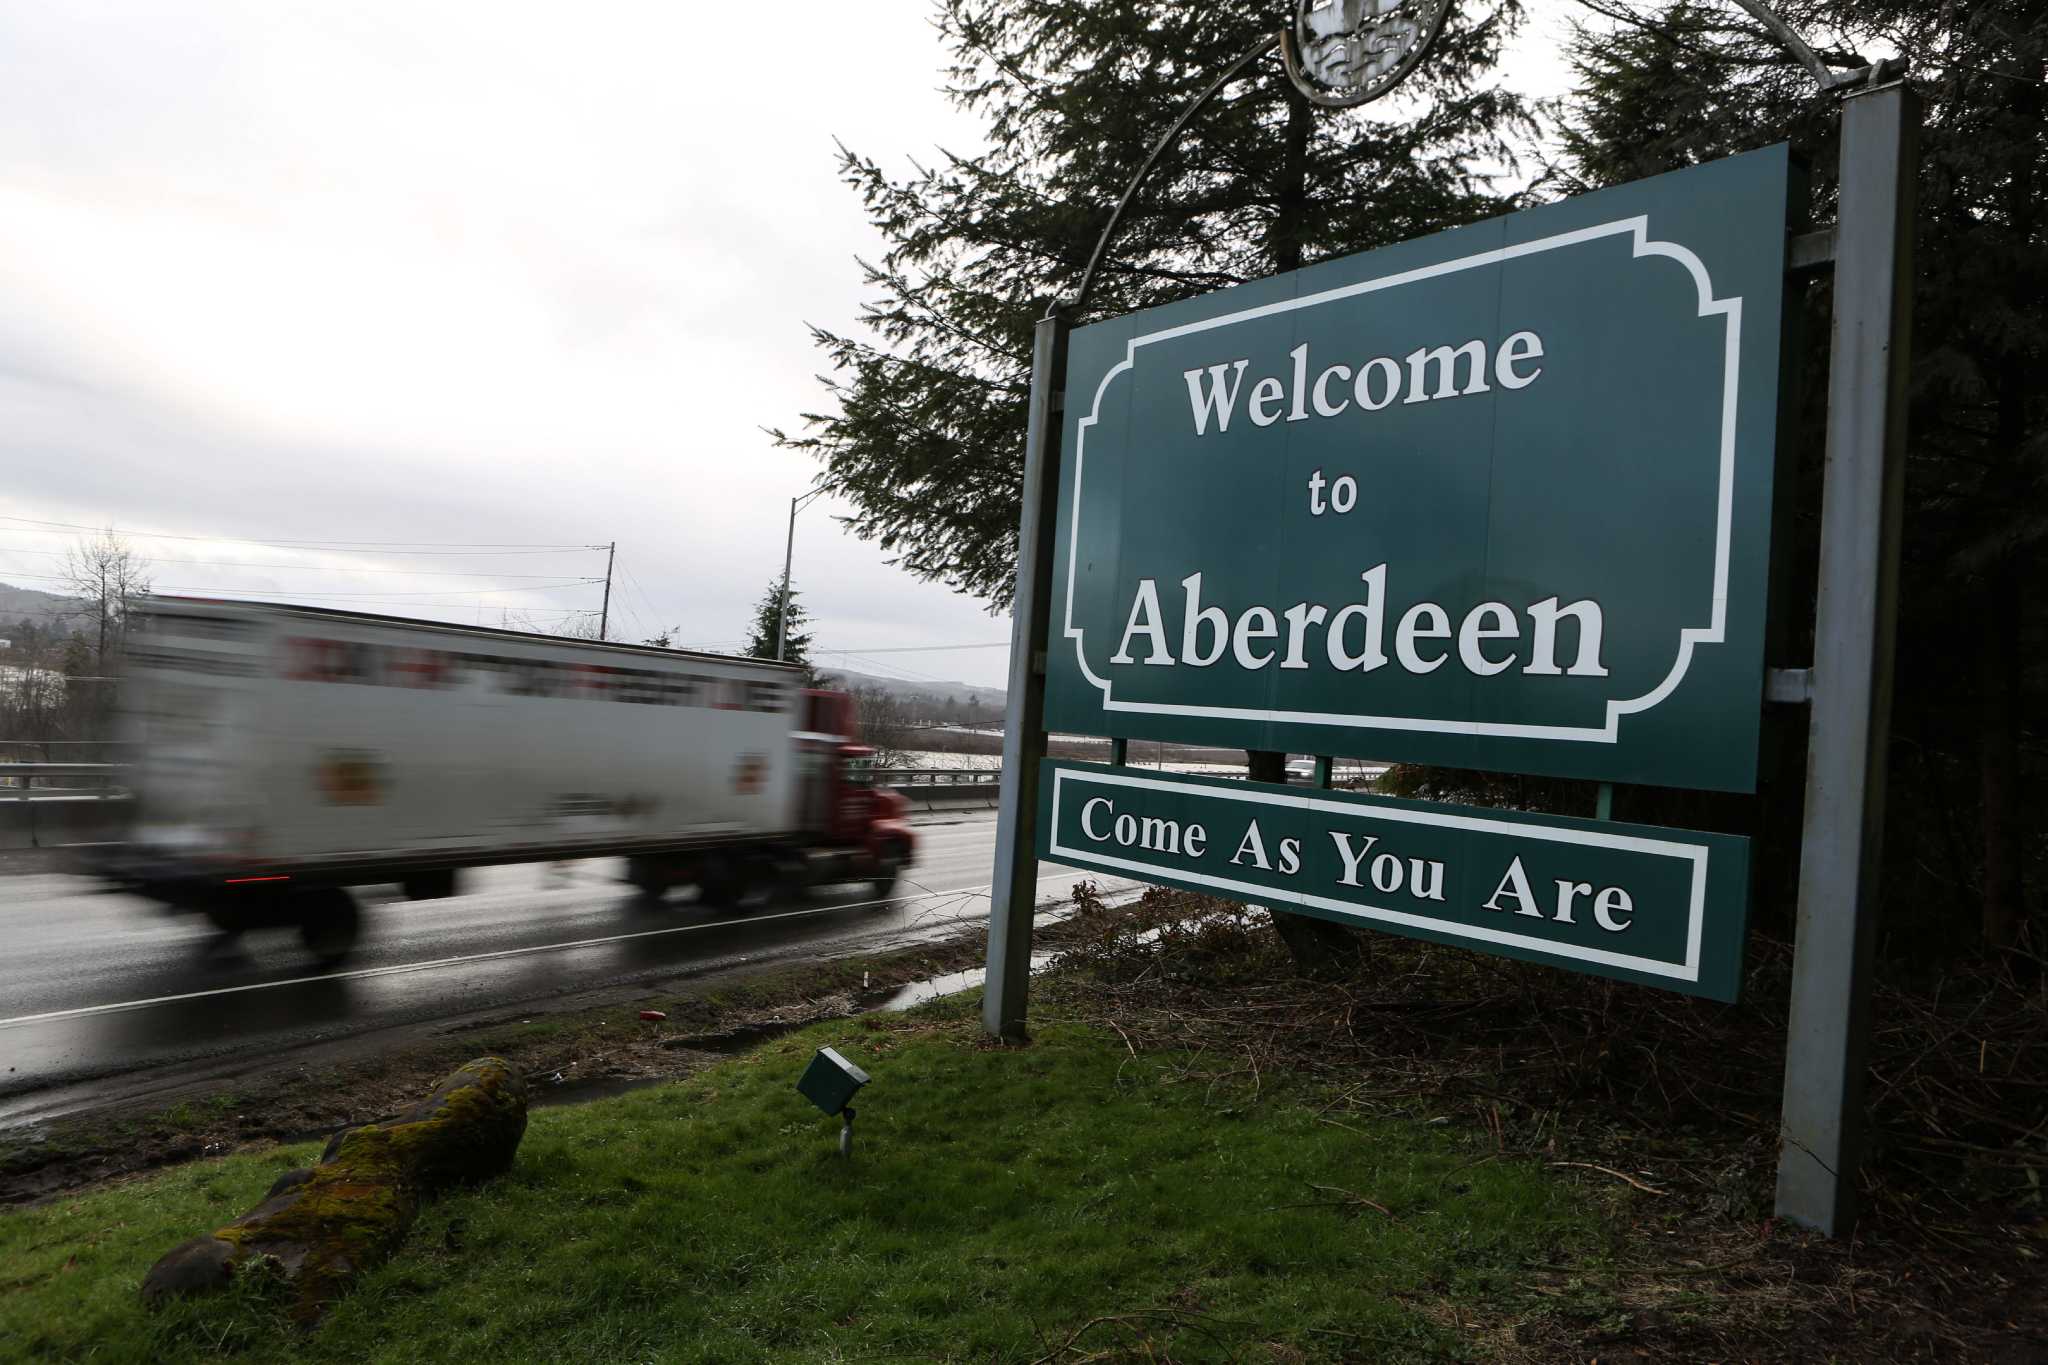 A corrections officer at an Aberdeen jail accused of providing information ...